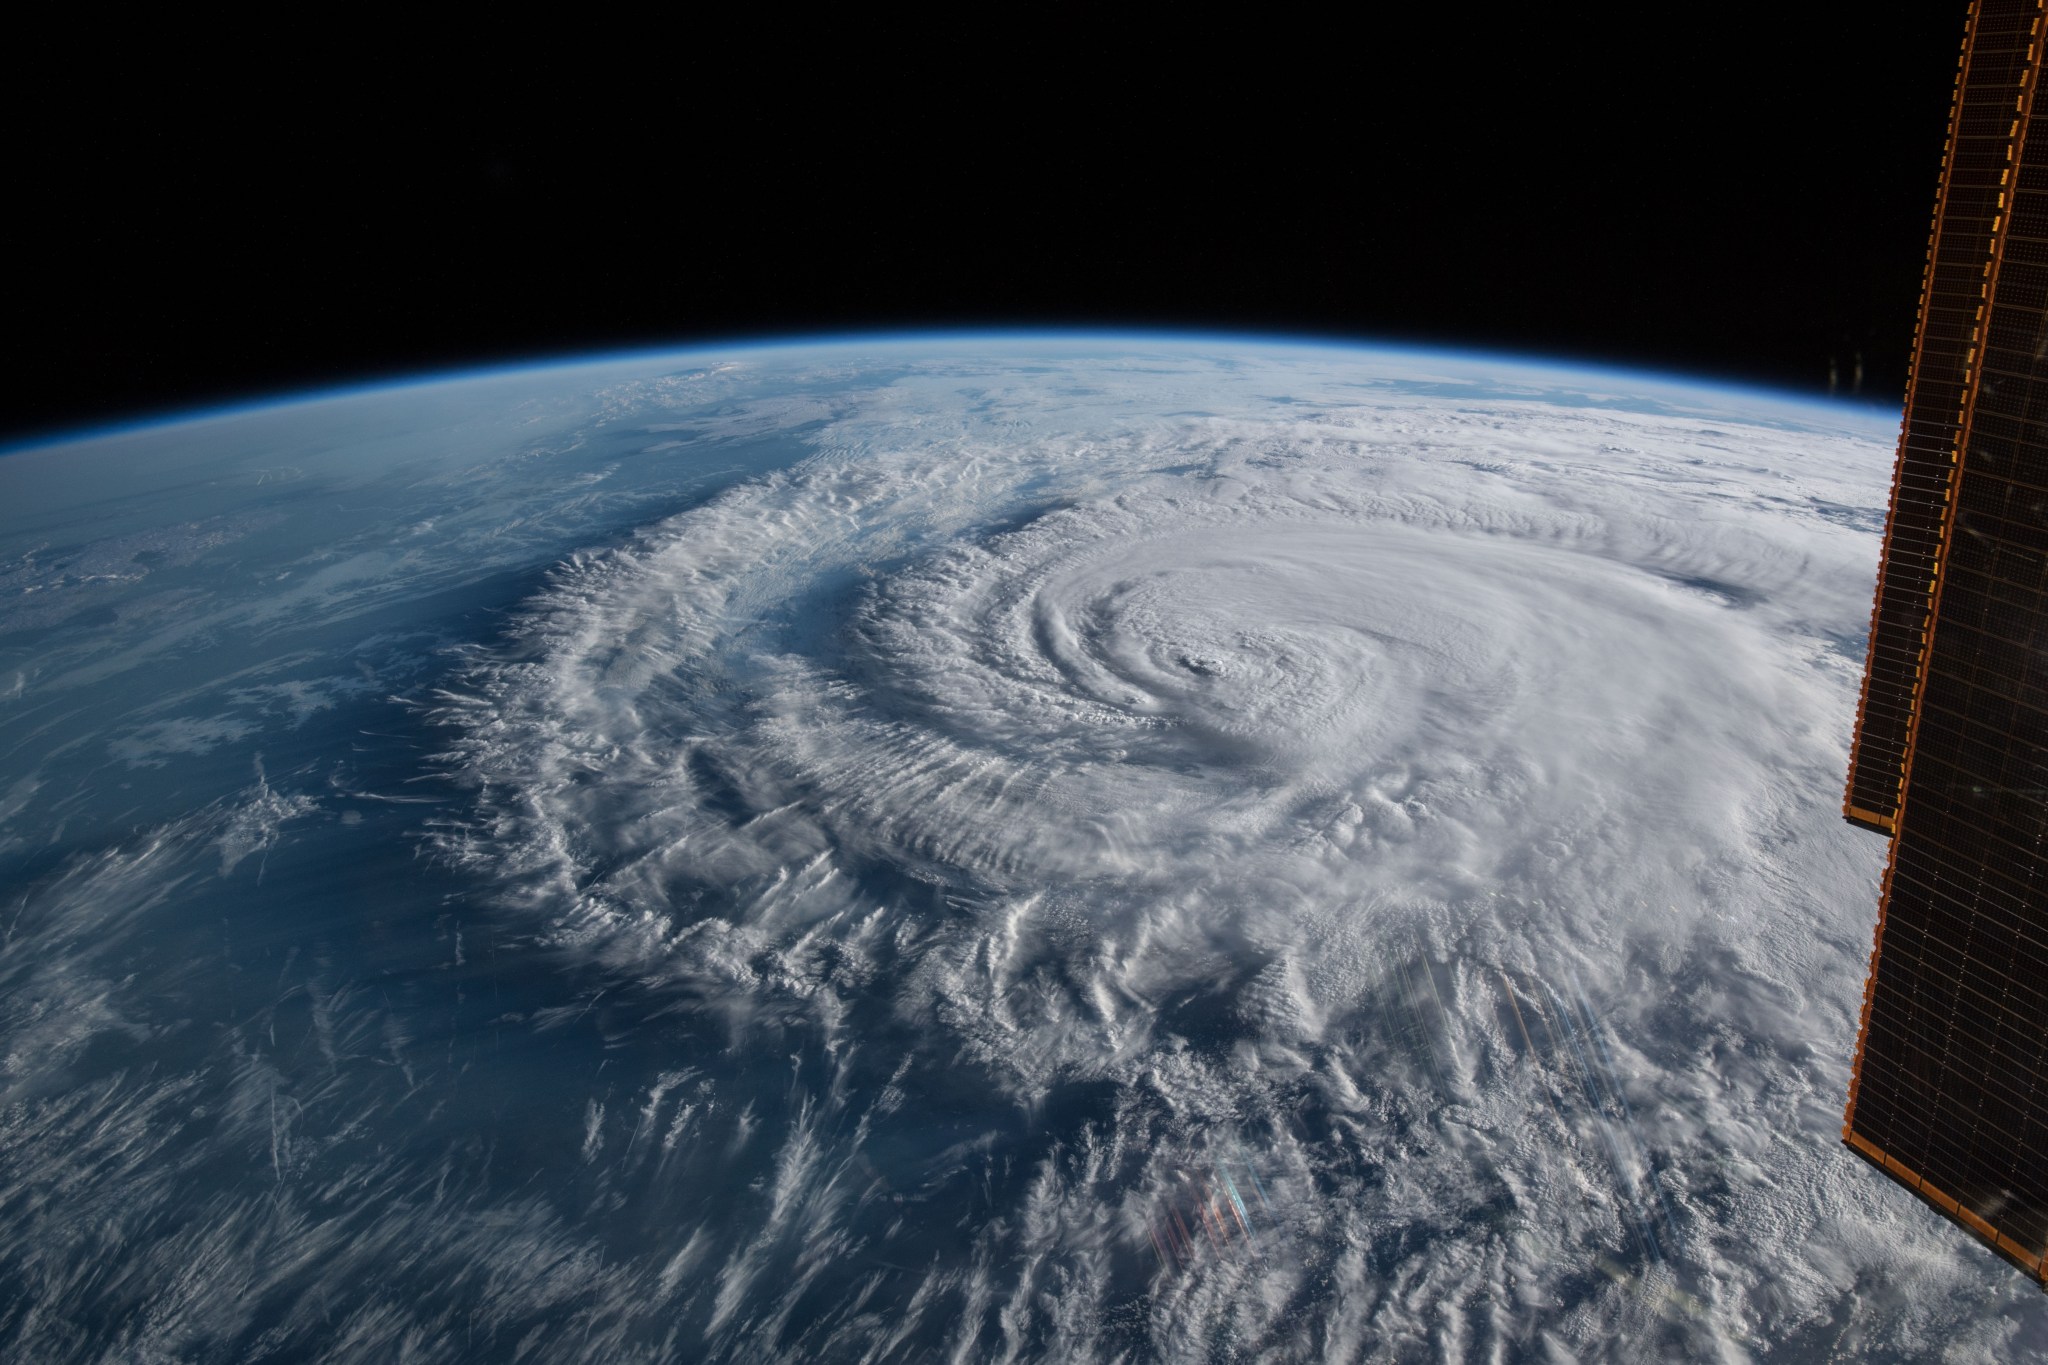 Hurricane Florence is pictured from the International Space Station as a category 1 storm as it was making landfall near Wrightsville Beach, North Carolina, Sept. 14, 2018.